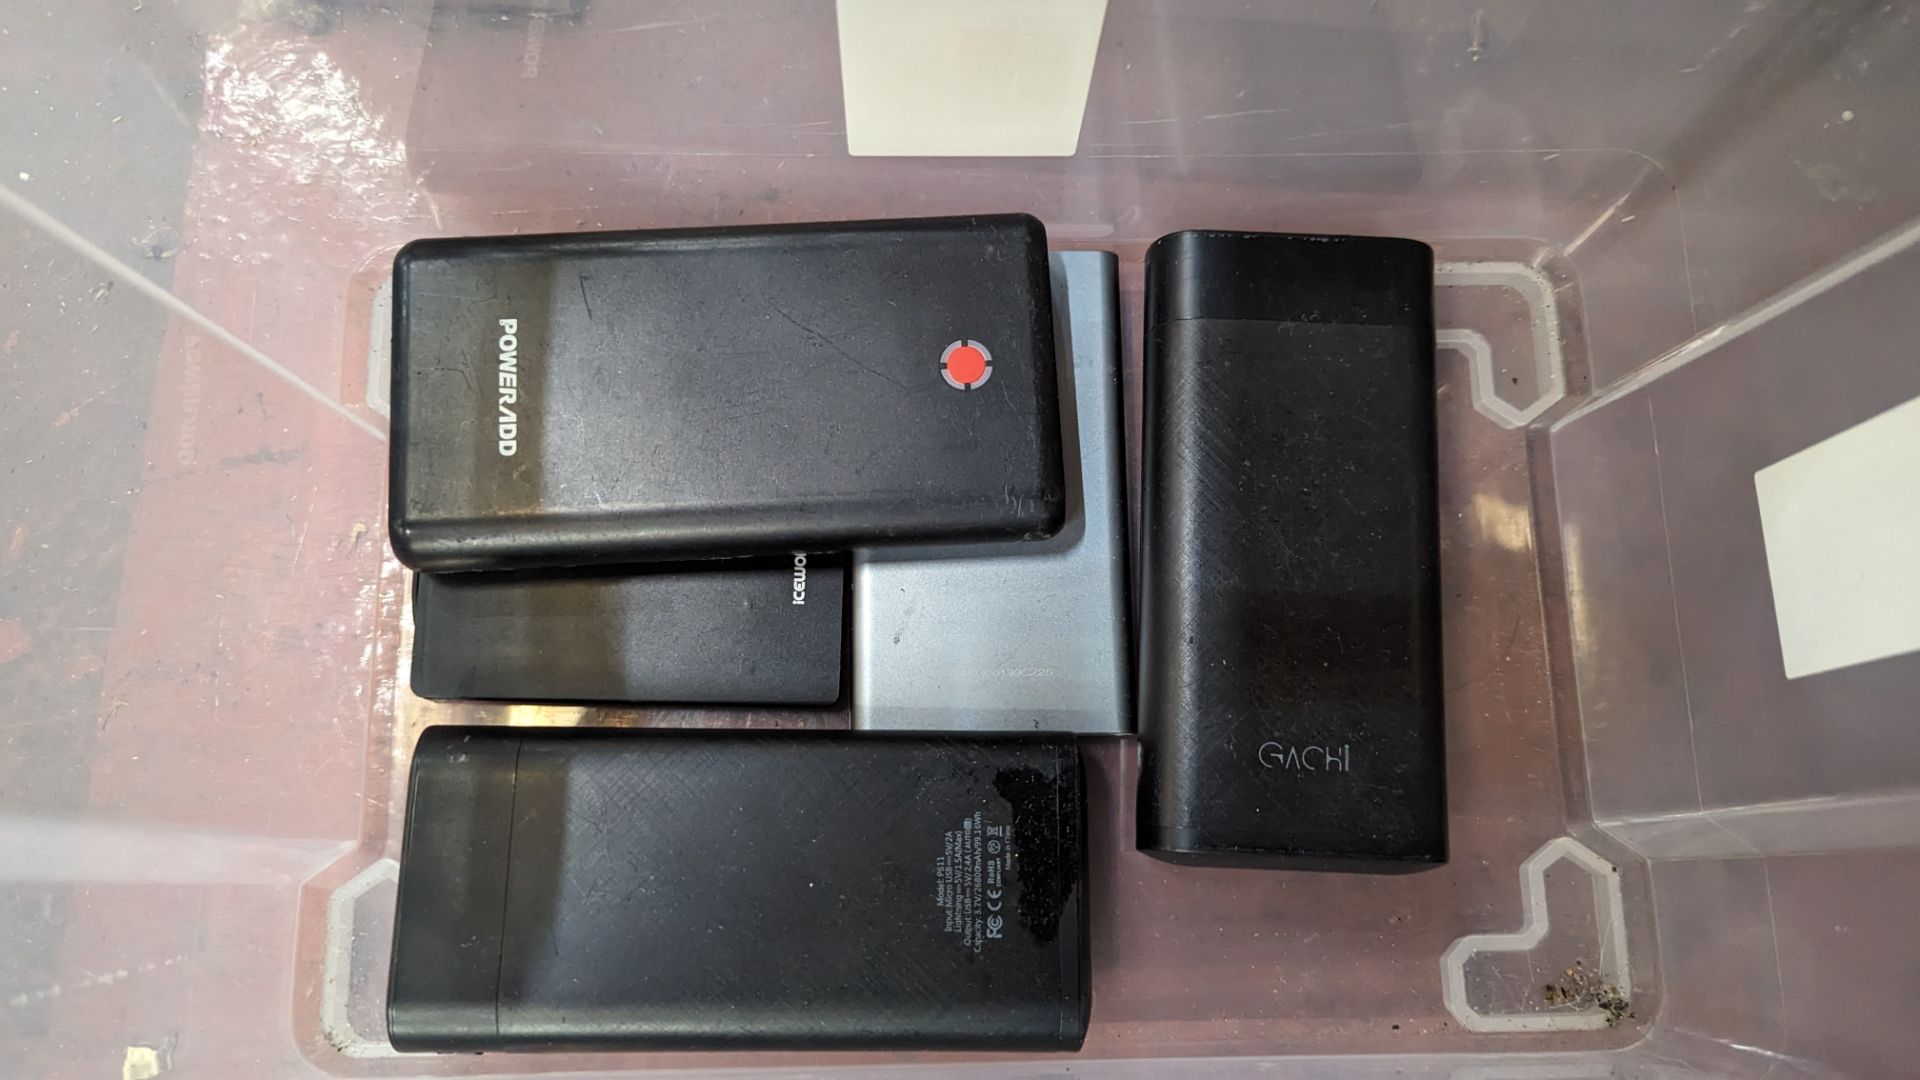 5 off portable power banks - Image 3 of 5